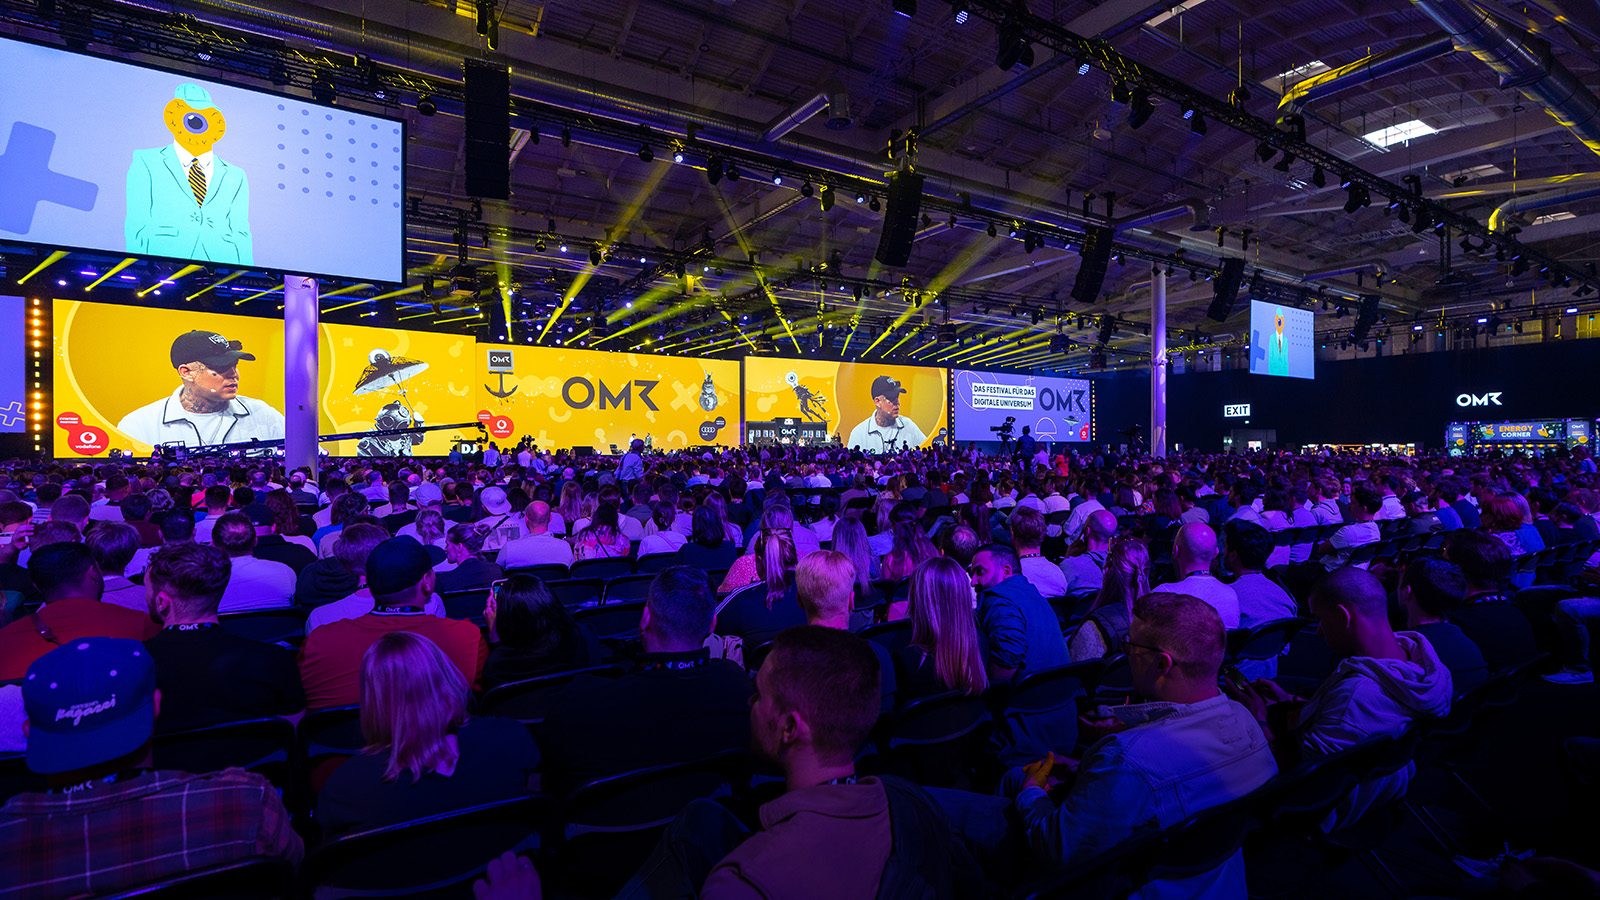 Over 1,000 GLP fixtures in use at OMR Festival in Hamburg